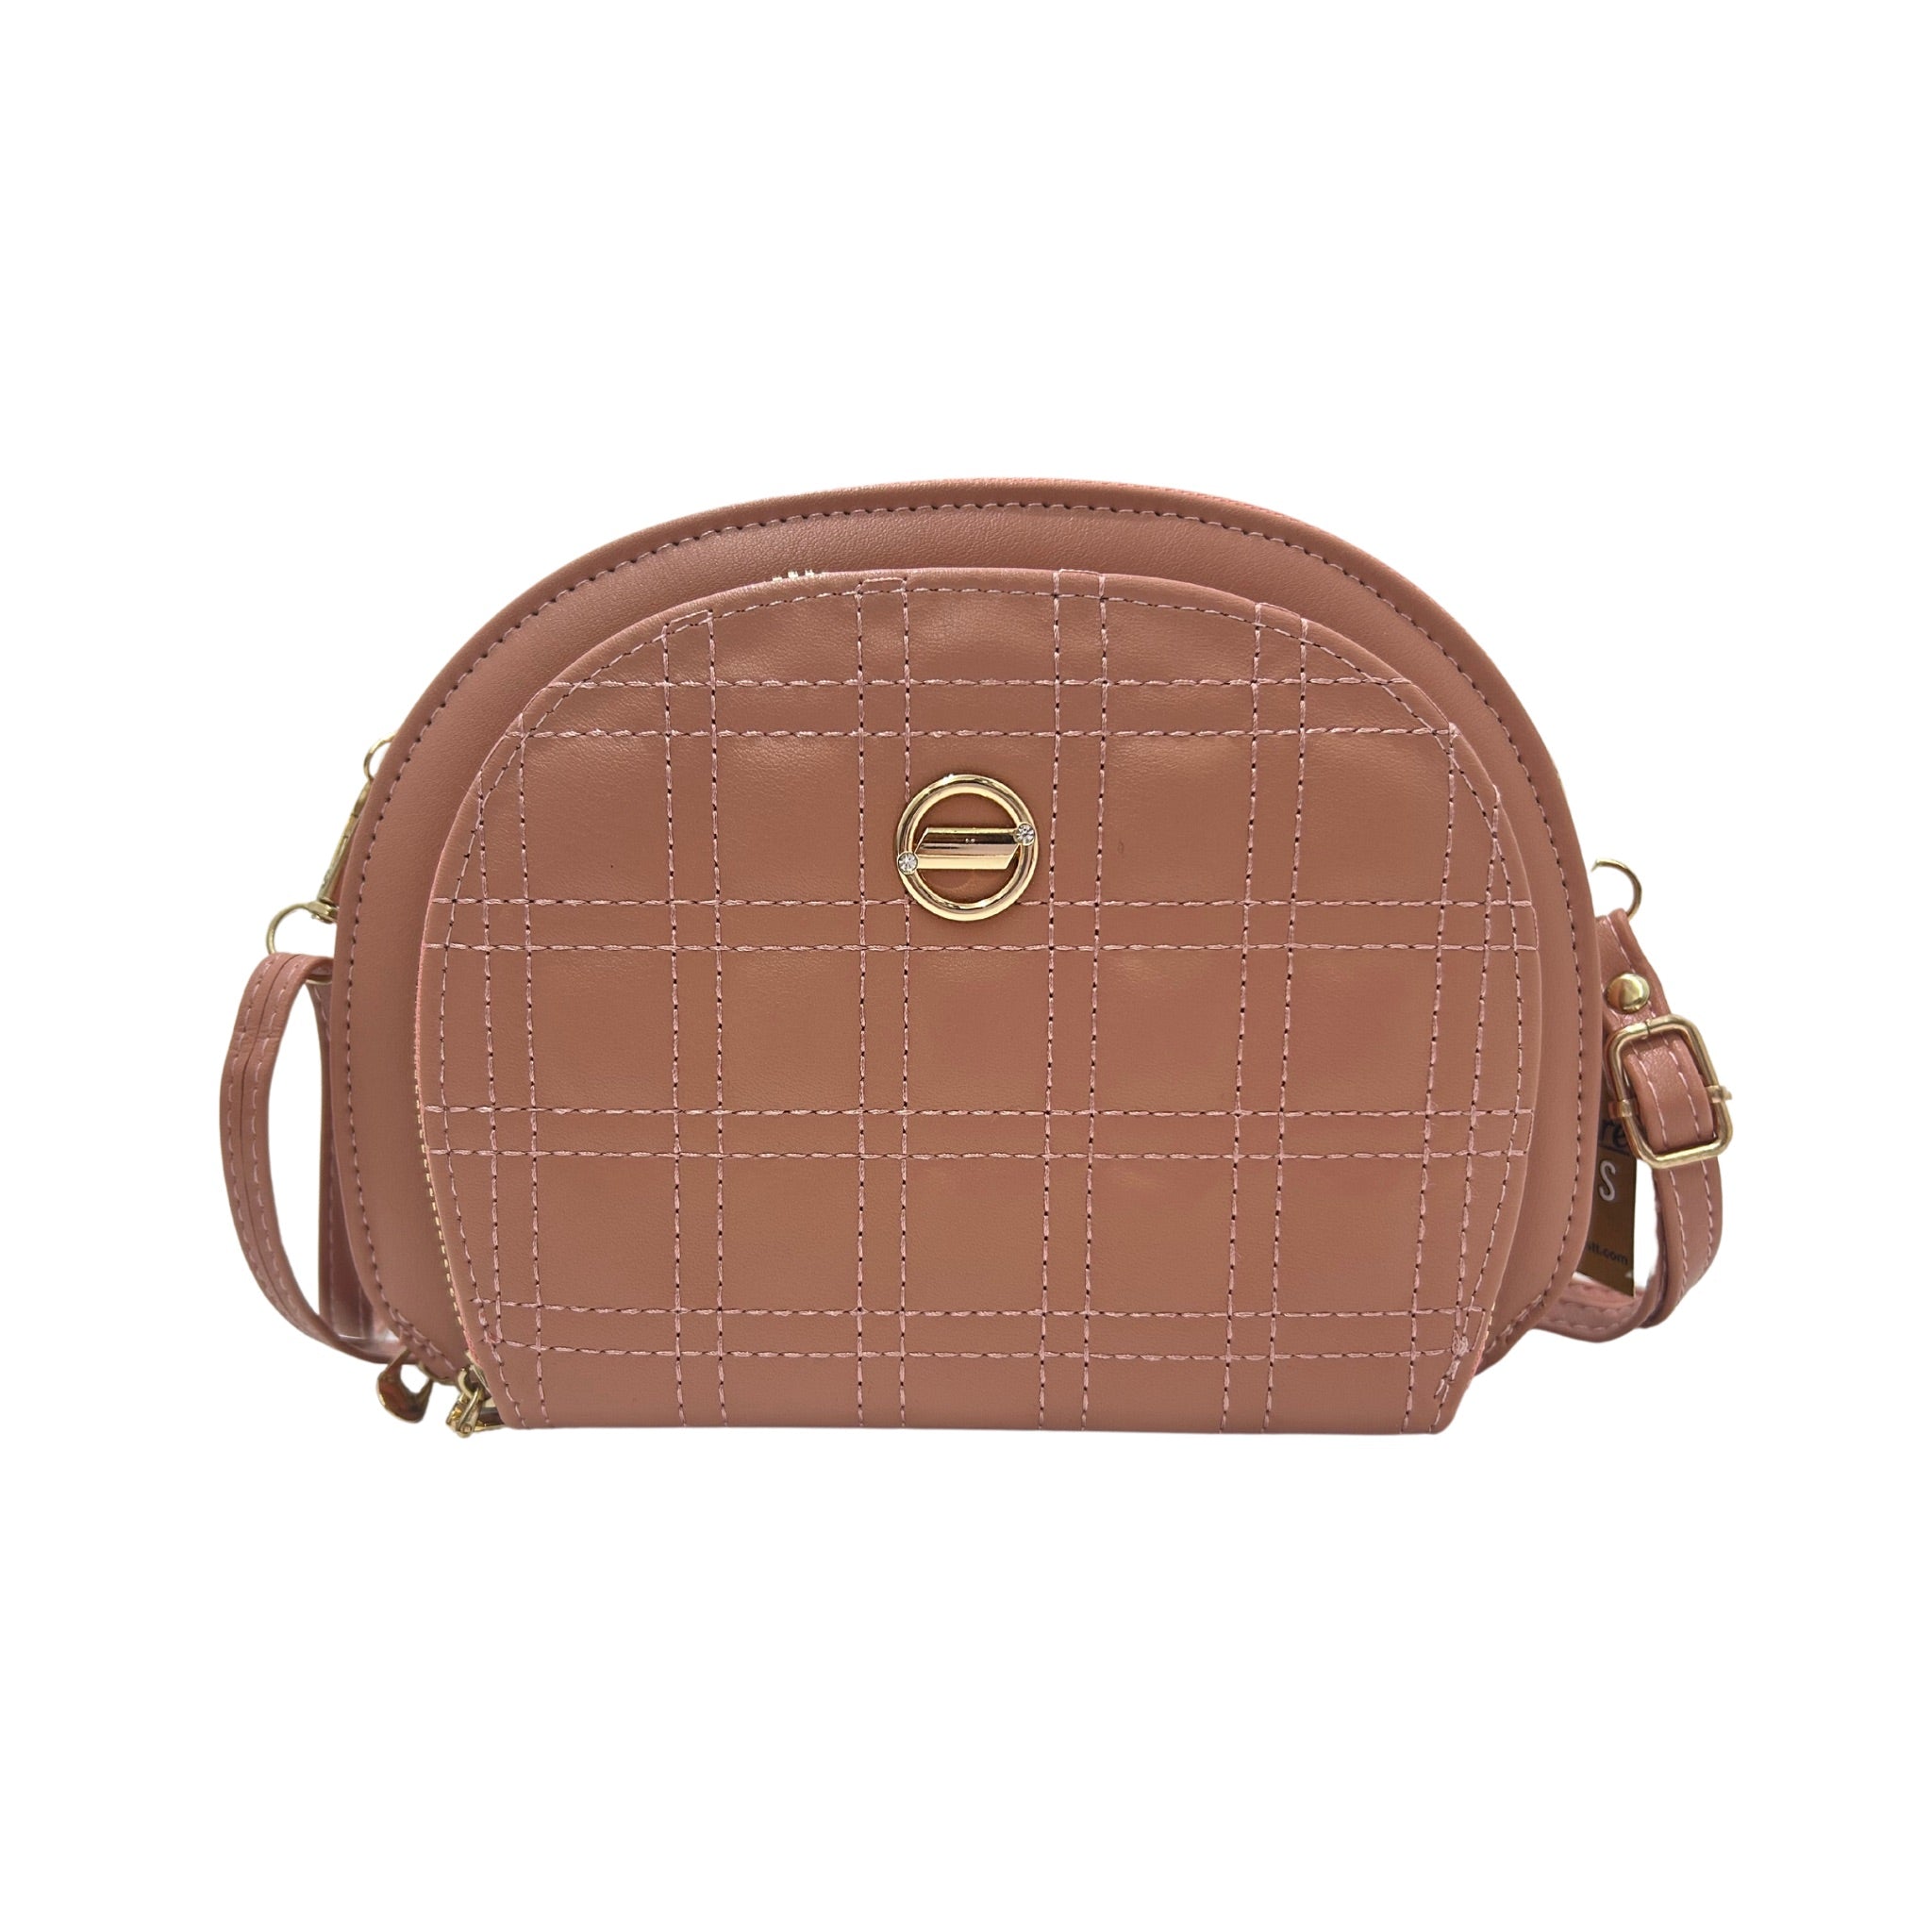 S3616 Rounded Crossbody Bag